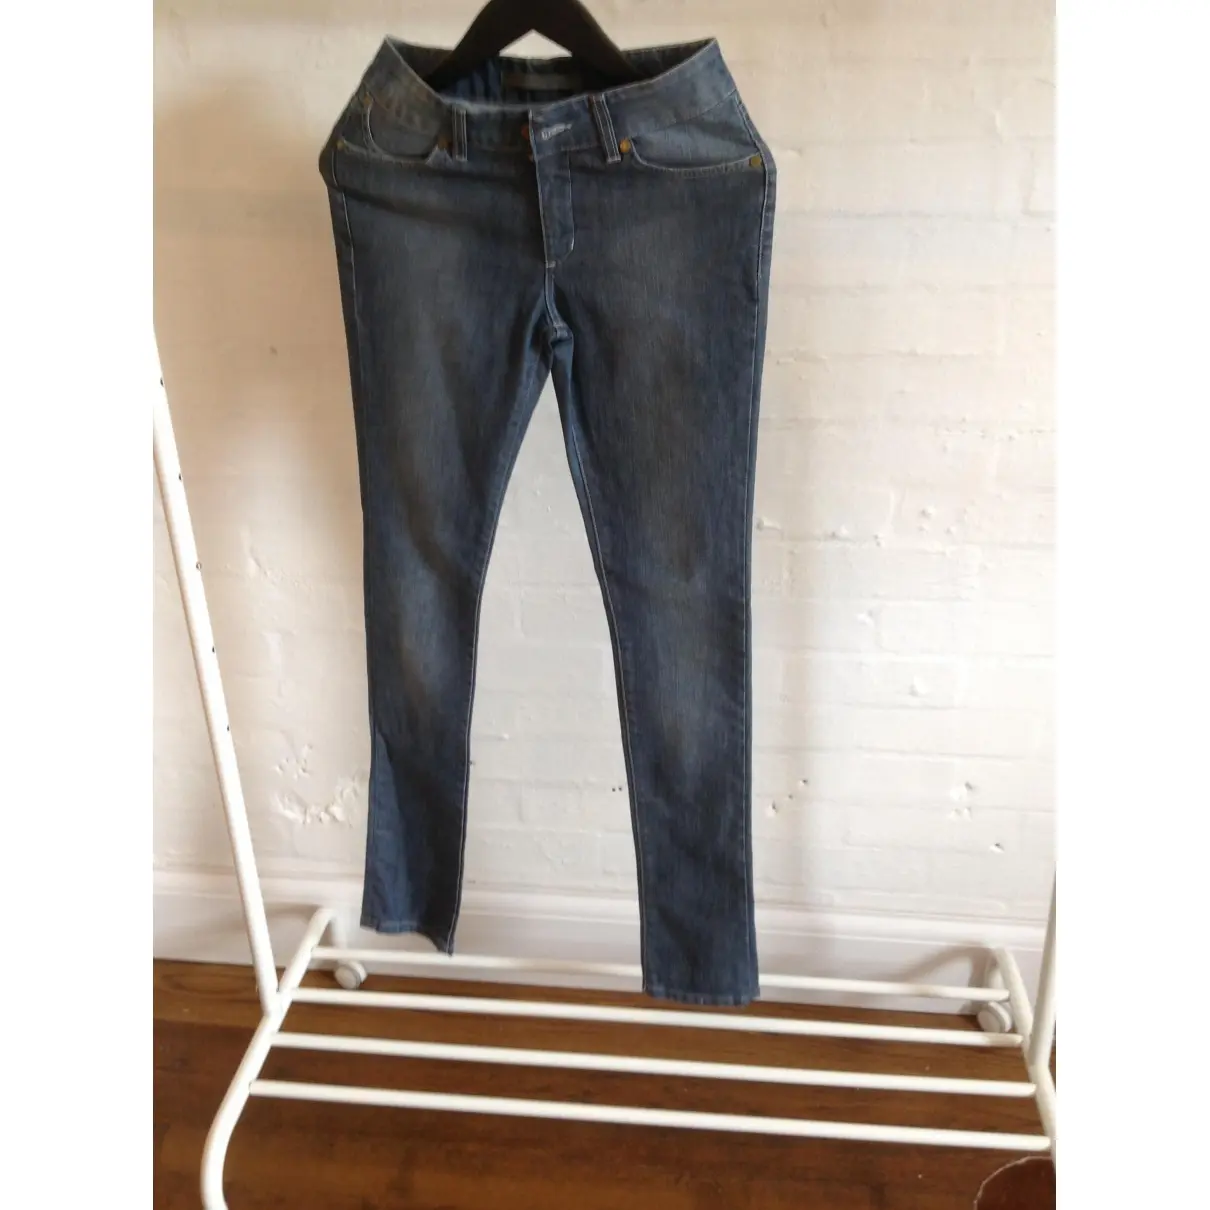 Superfine Slim jeans for sale